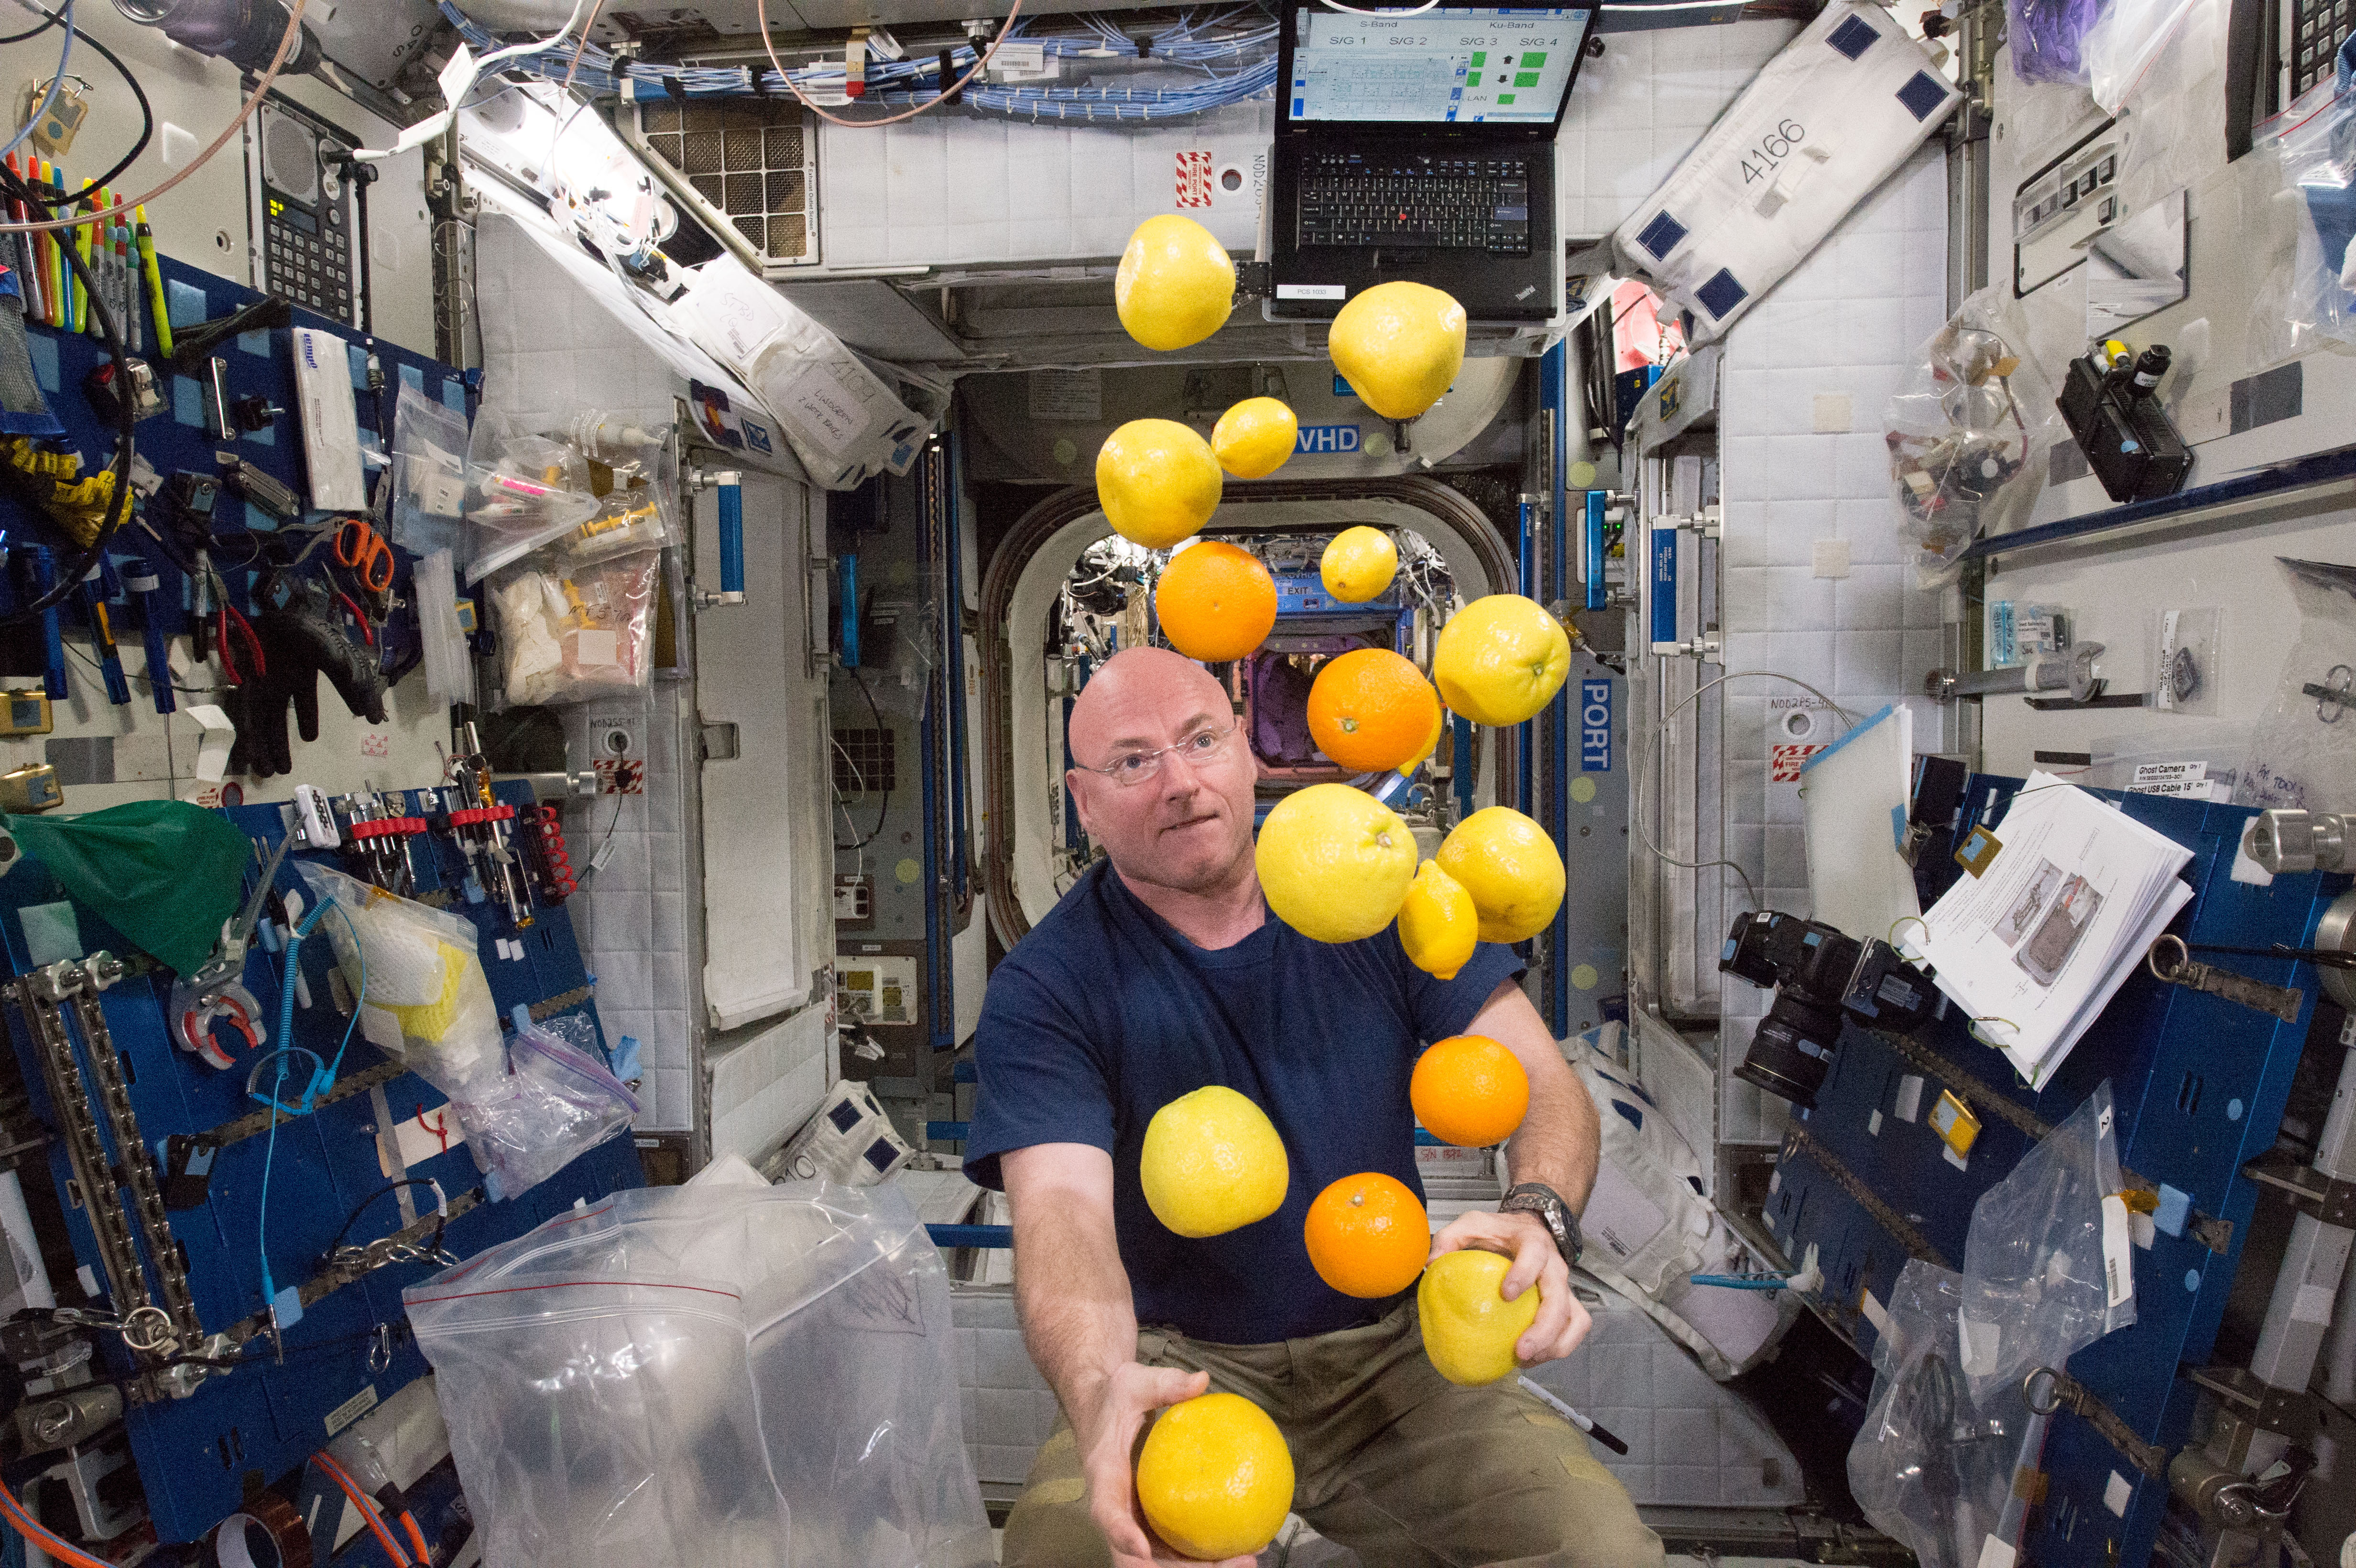 NASA astronaut Scott Kelly corrals the supply of fresh fruit that arrived on HTV-5